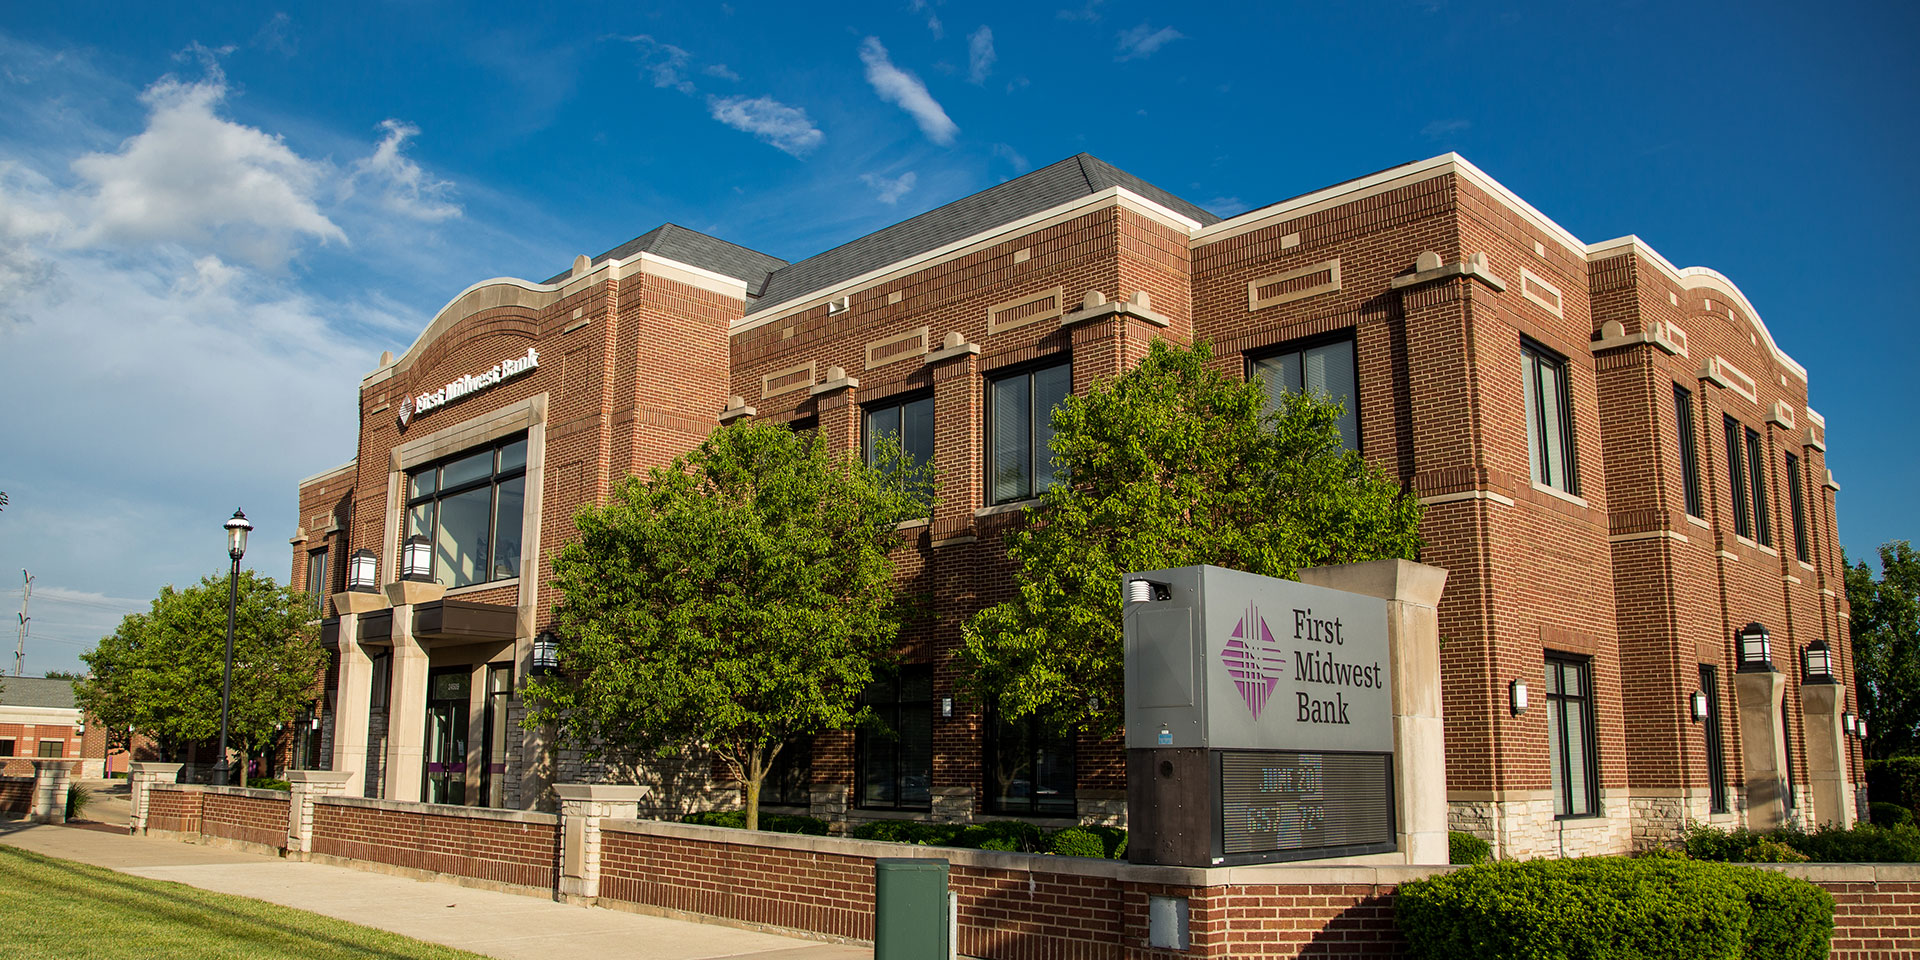 A building exterior photo of a First Midwest Bank location on a sunny day